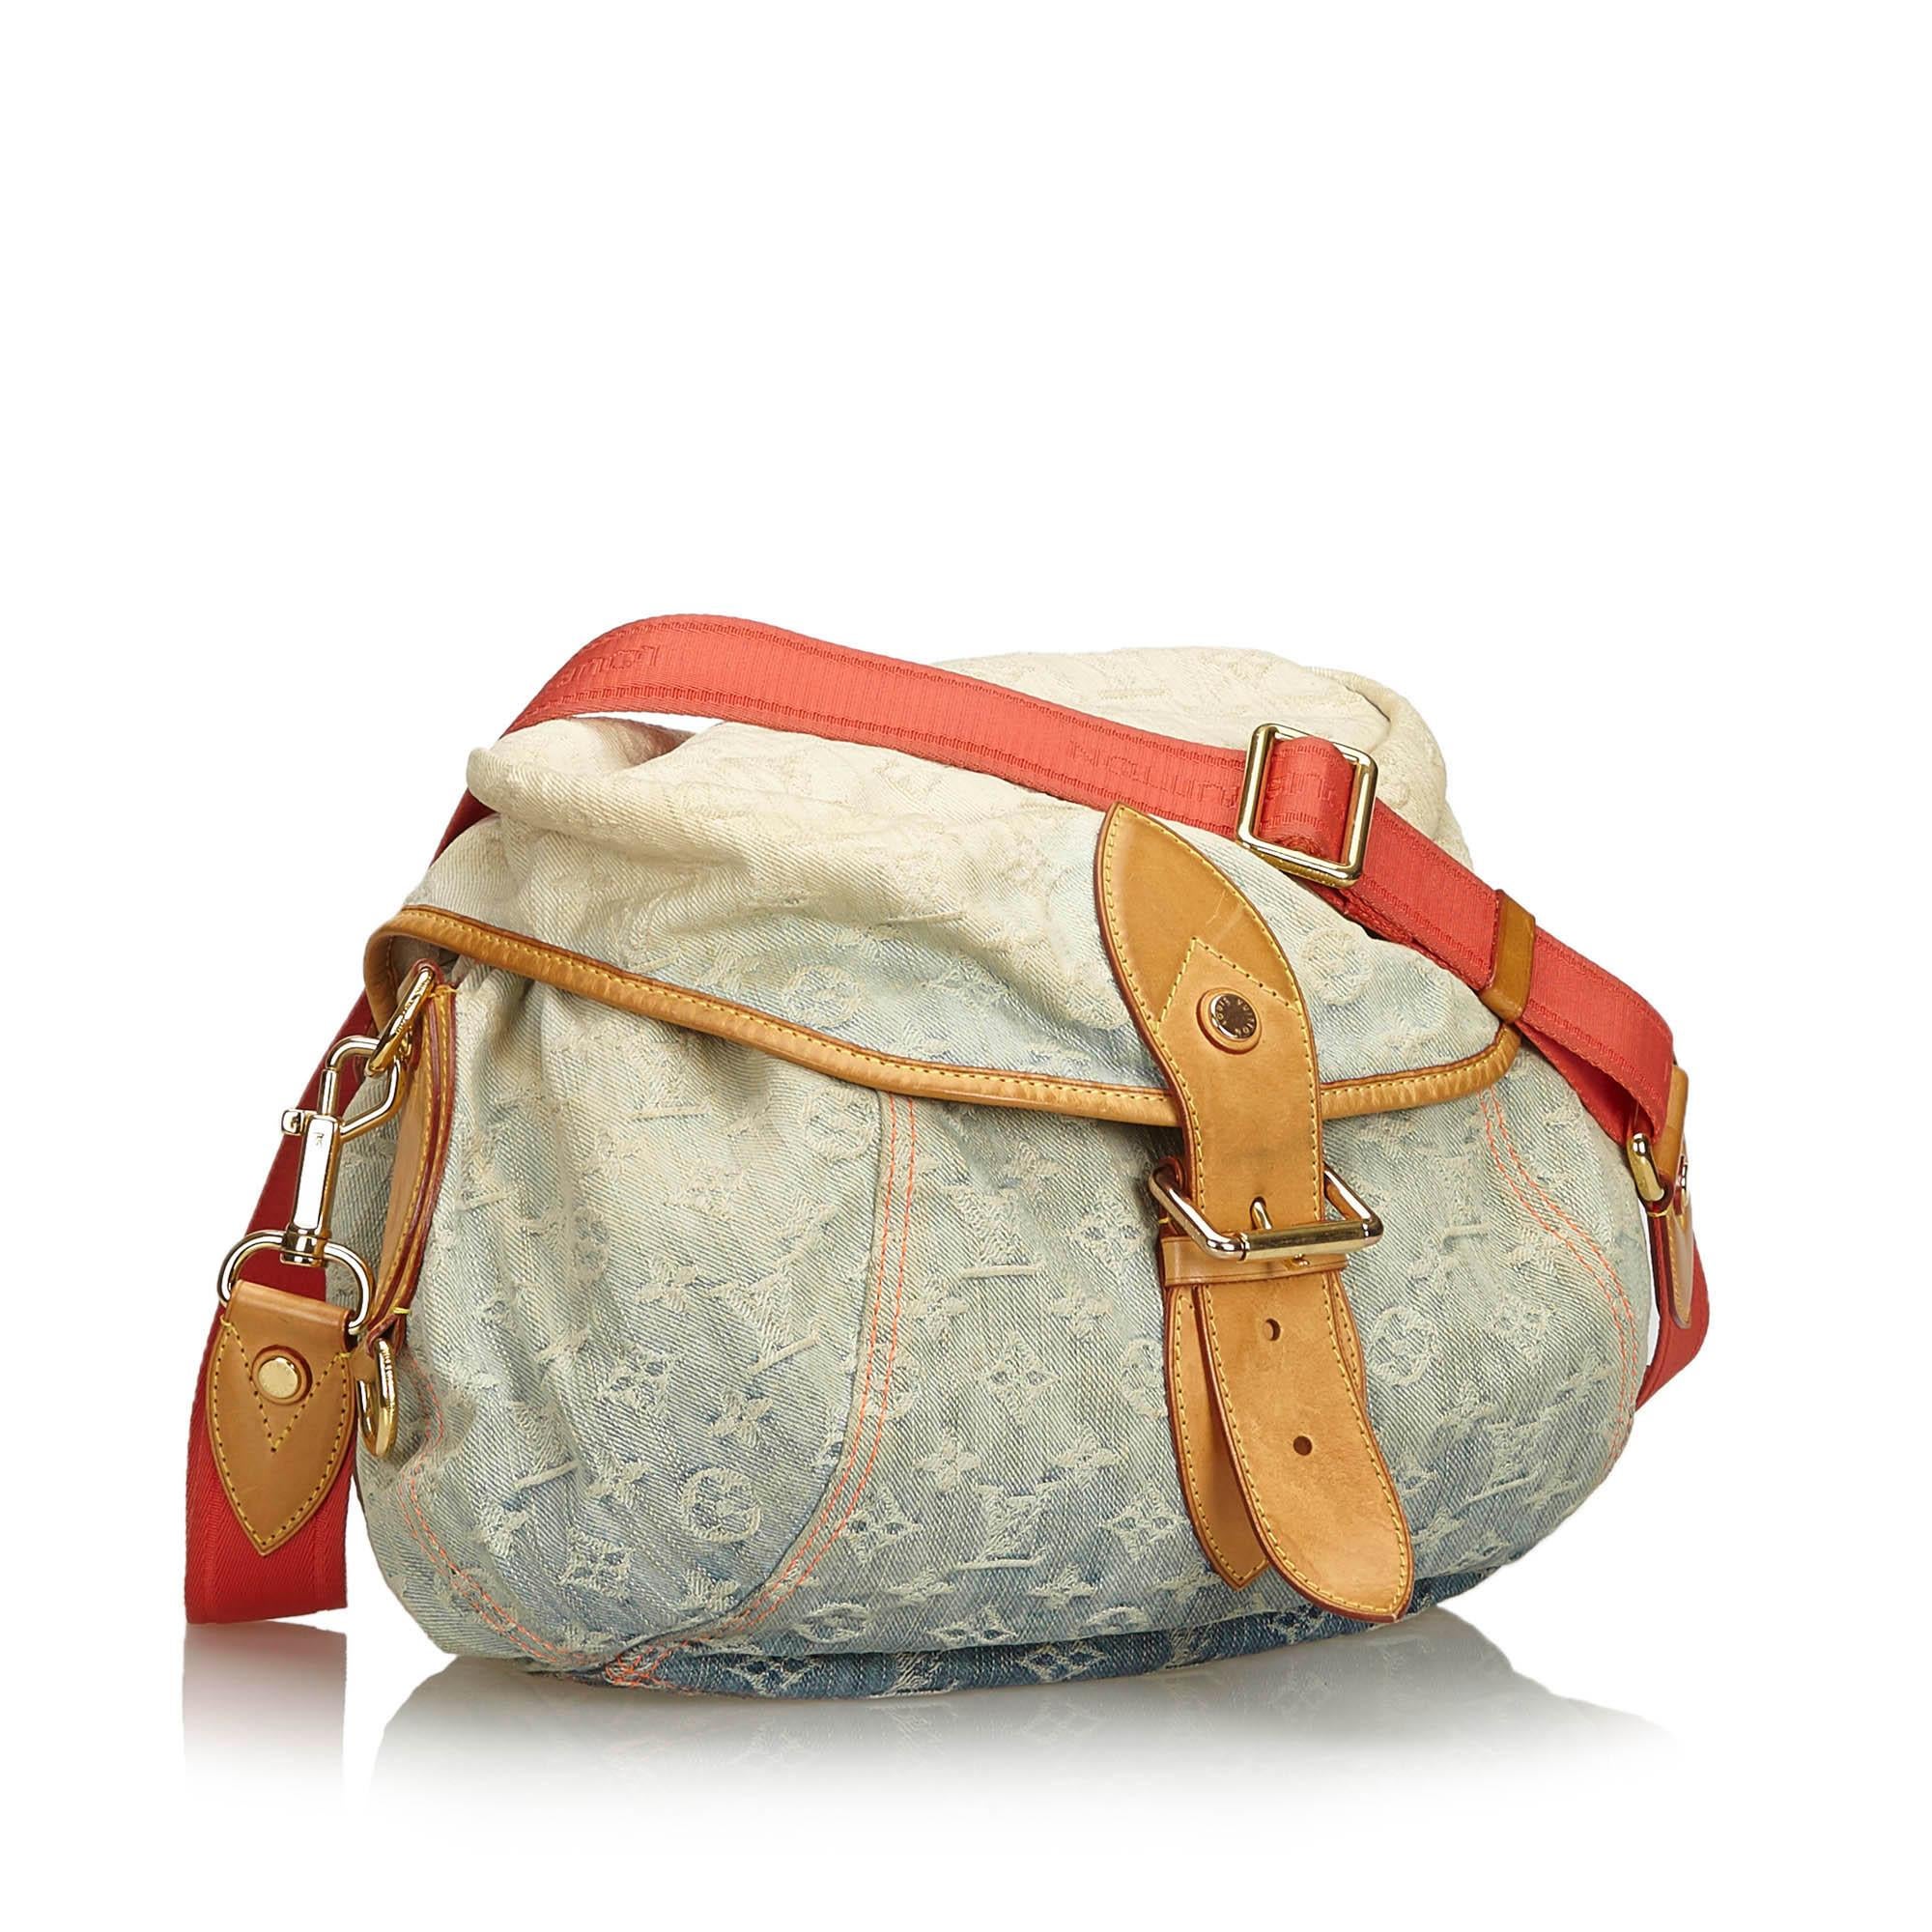 The Sunshine features a denim body with a monogram print and vachetta leather trim, flat strap, top flap with buckle closure, and interior slip pocket. It carries as B+ condition rating.

Inclusions: 
This item does not come with inclusions.


Louis